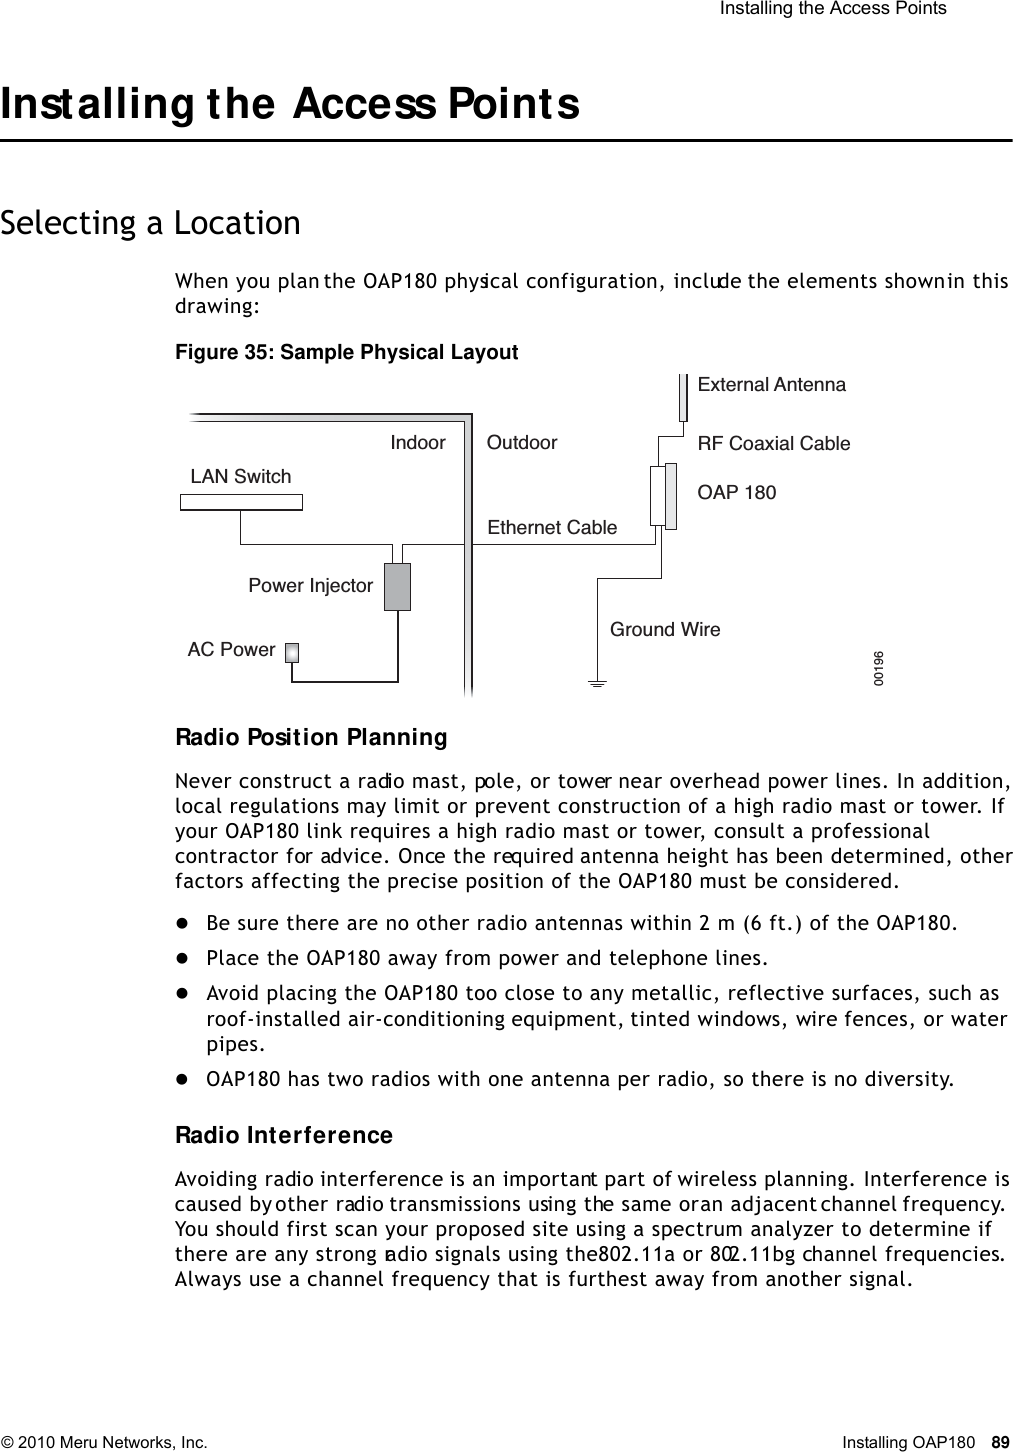  Installing the Access Points © 2010 Meru Networks, Inc. Installing OAP180 89 Installing the Access PointsSelecting a LocationWhen you plan the OAP180 physical configuration, include the elements shown in this drawing:Figure 35: Sample Physical LayoutRadio Position PlanningNever construct a radio mast, pole, or tower near overhead power lines. In addition, local regulations may limit or prevent construction of a high radio mast or tower. If your OAP180 link requires a high radio mast or tower, consult a professional contractor for advice. Once the required antenna height has been determined, other factors affecting the precise position of the OAP180 must be considered.Be sure there are no other radio antennas within 2 m (6 ft.) of the OAP180.Place the OAP180 away from power and telephone lines.Avoid placing the OAP180 too close to any metallic, reflective surfaces, such as roof-installed air-conditioning equipment, tinted windows, wire fences, or water pipes.OAP180 has two radios with one antenna per radio, so there is no diversity.Radio InterferenceAvoiding radio interference is an important part of wireless planning. Interference is caused by other radio transmissions using the same or an adjacent channel frequency. You should first scan your proposed site using a spectrum analyzer to determine if there are any strong radio signals using the 802.11a or 802.11bg channel frequencies. Always use a channel frequency that is furthest away from another signal.LAN SwitchIndoor OutdoorEthernet CableExternal AntennaRF Coaxial CableOAP 180Ground WirePower InjectorAC Power00196 